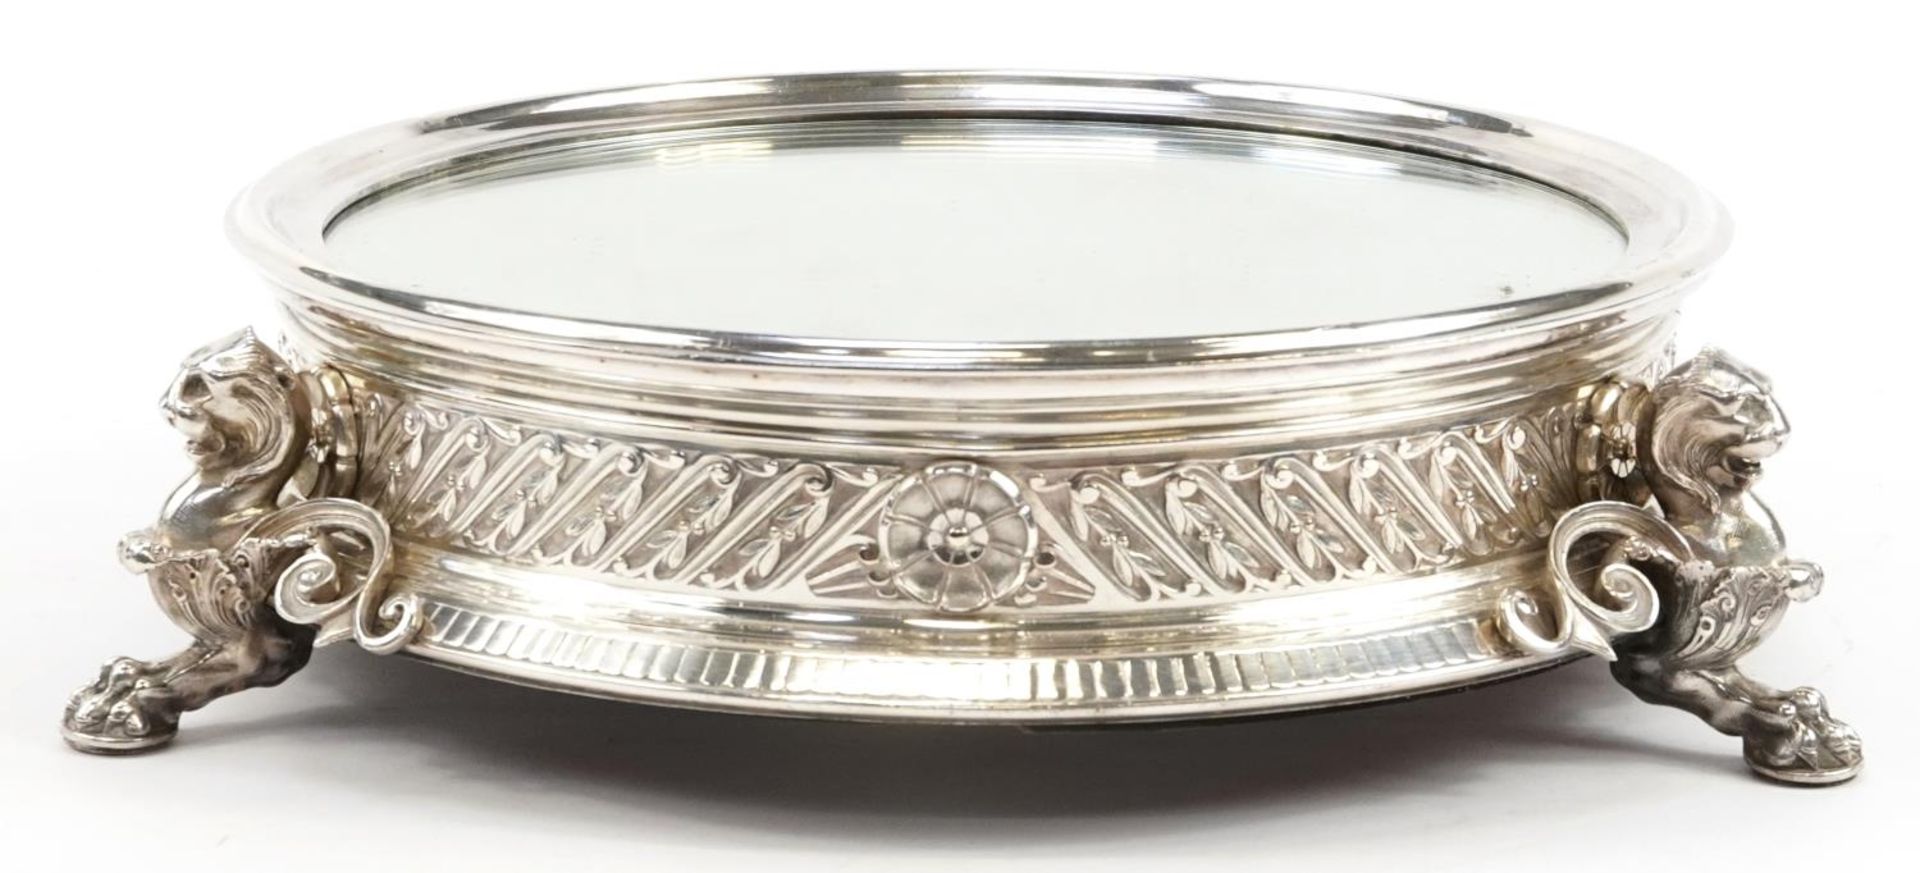 Elkington & Co, good Victorian silver plated mirrored cake stand with three lion design supports - Image 2 of 7